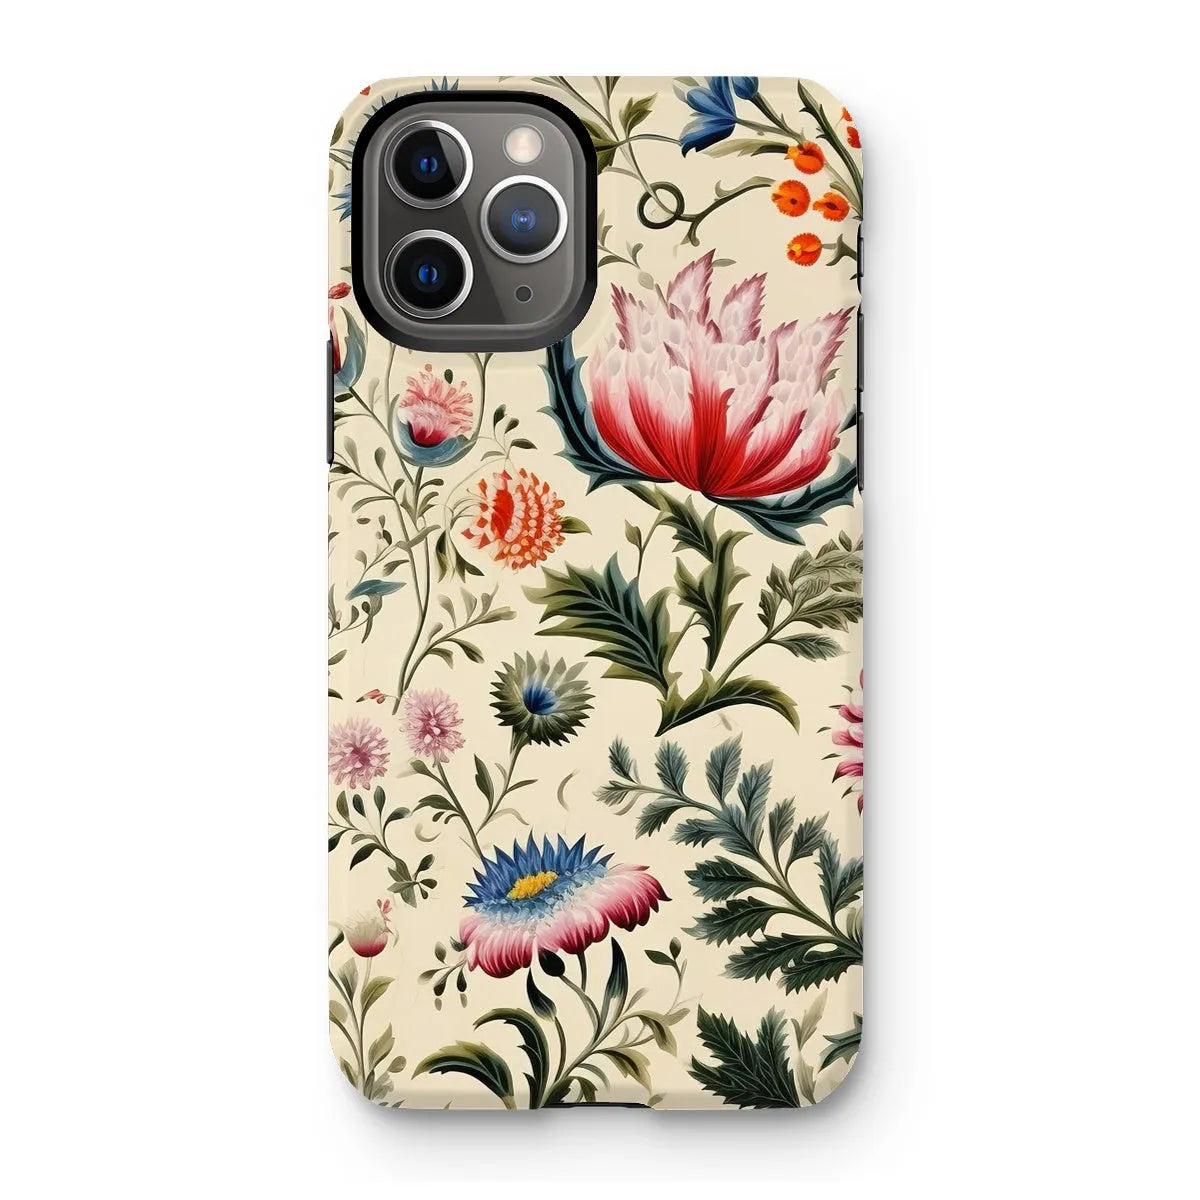 Wildflower Hoopla - Floral Garden Aesthetic Phone Case - Iphone 11 Pro / Matte - Mobile Phone Cases - Aesthetic Art